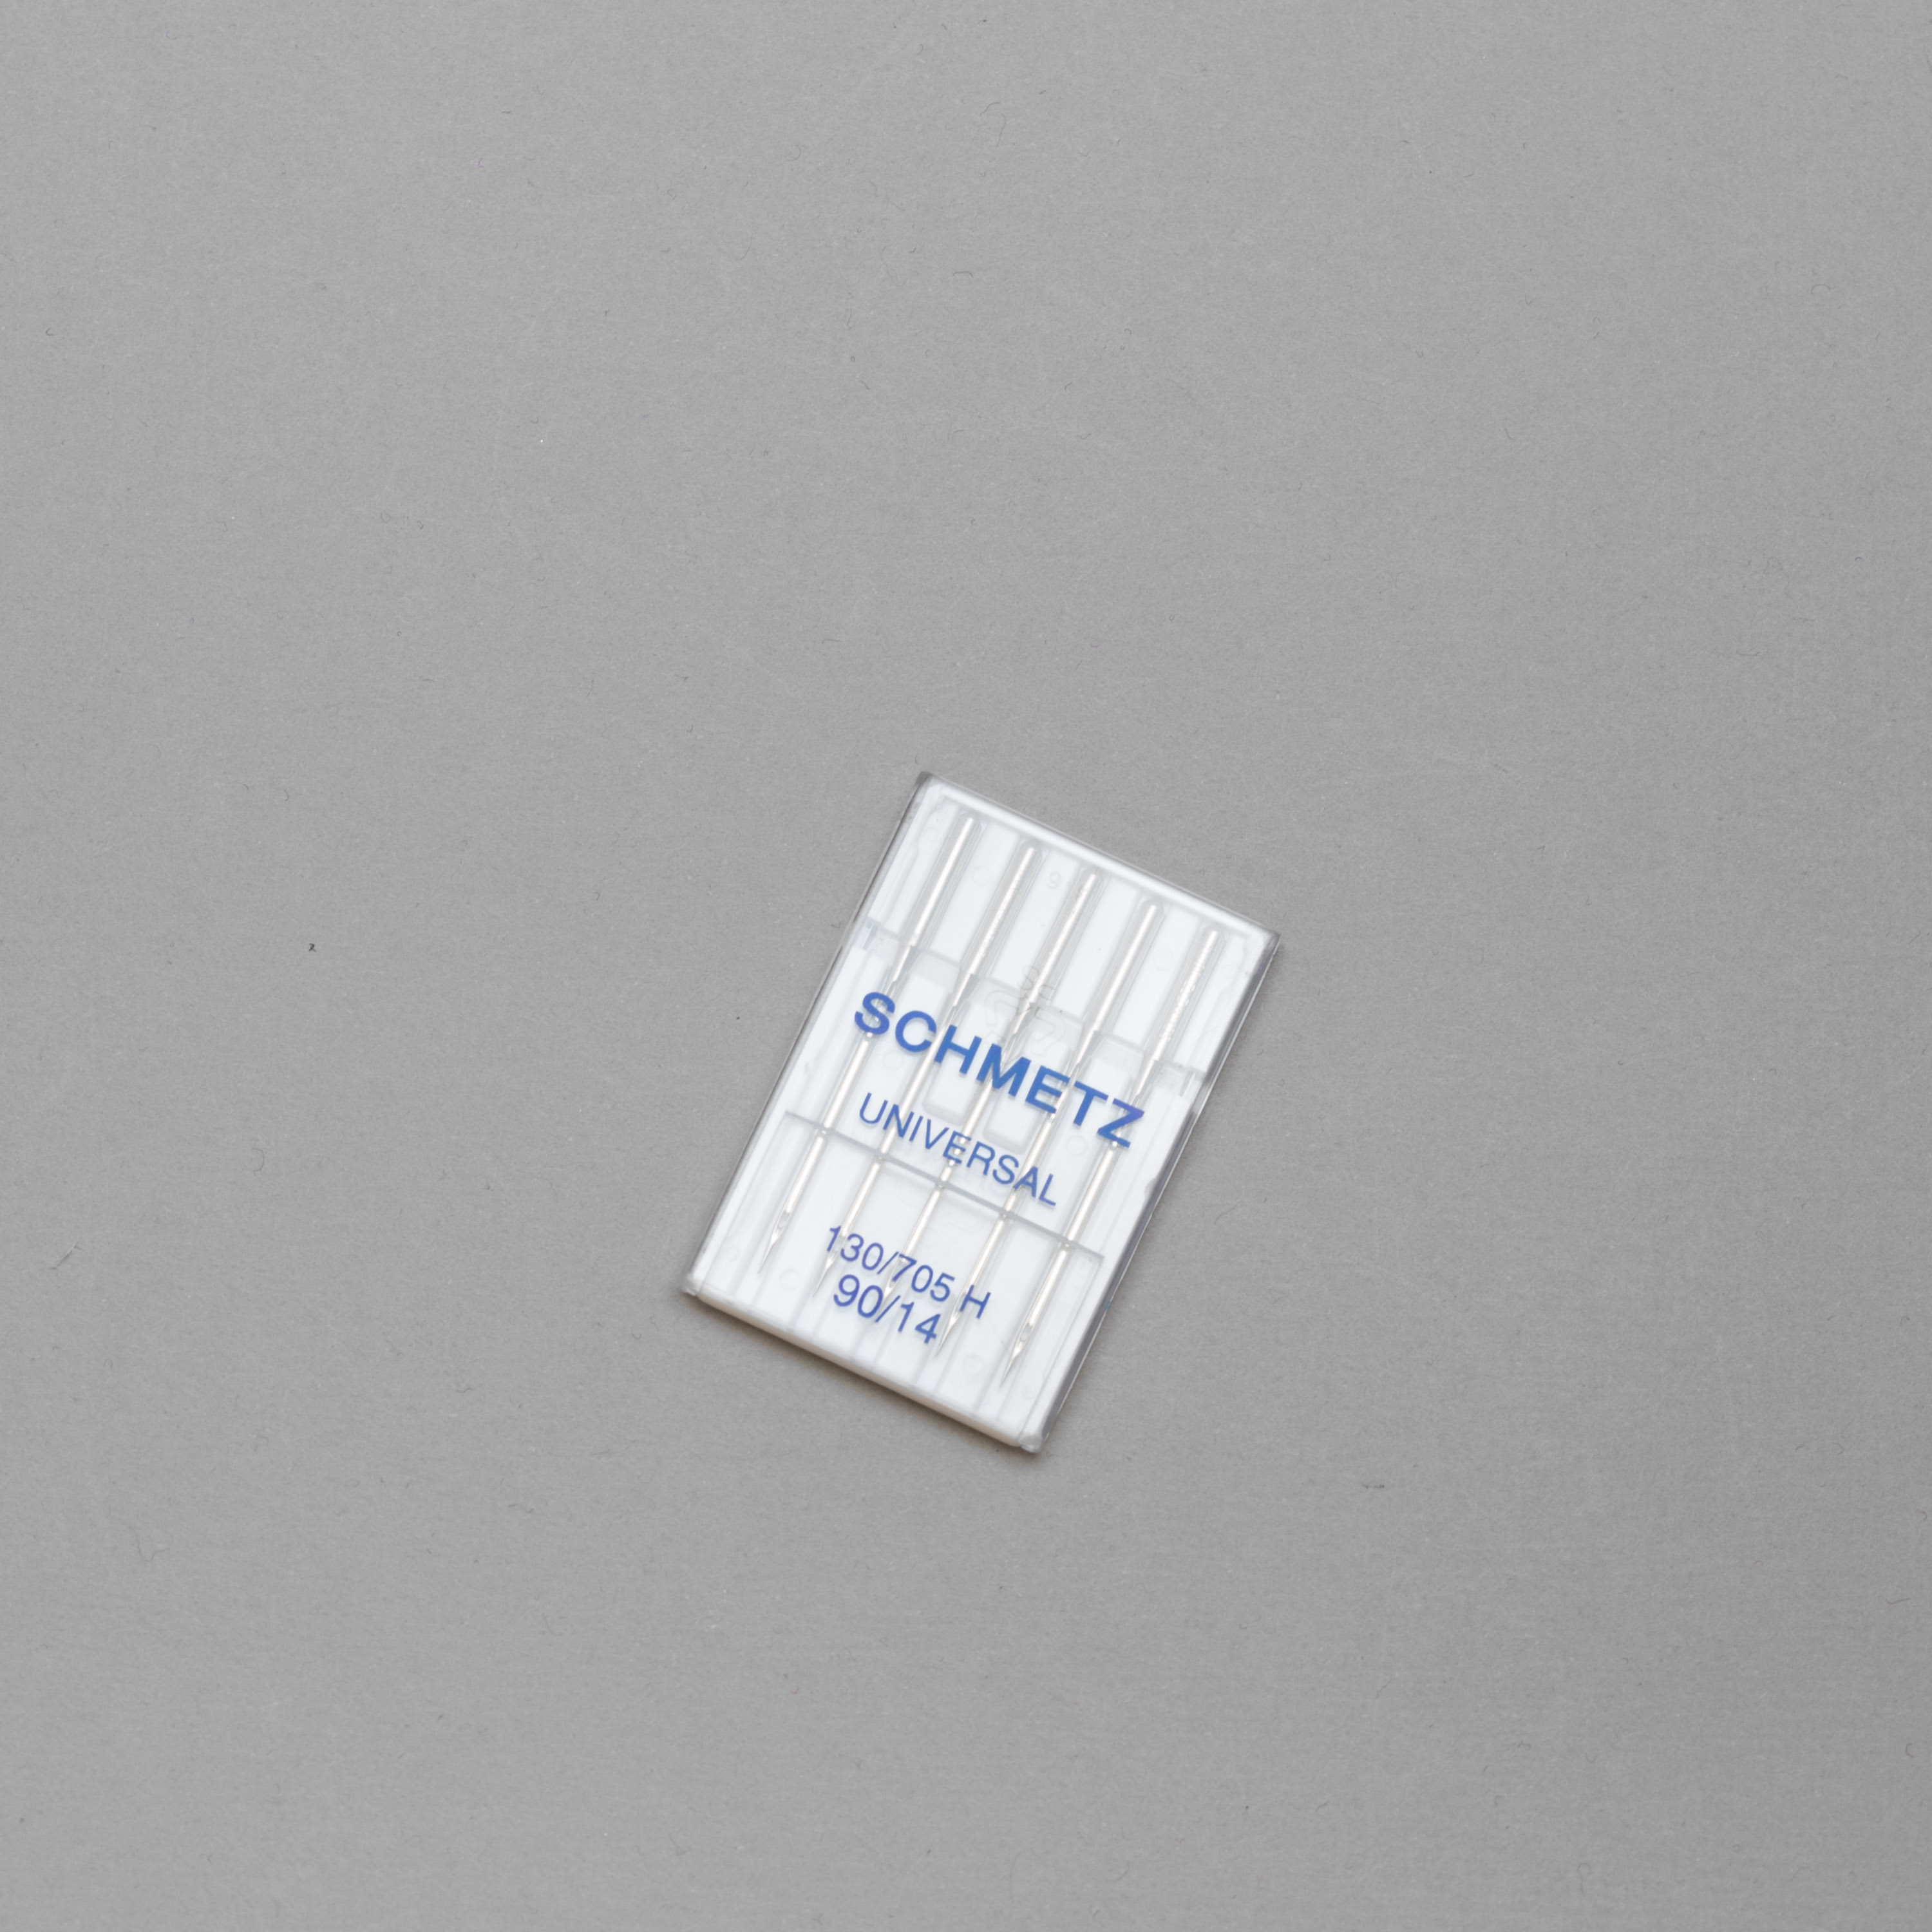 schmetz stretch sewing machine needles NS-1000 9014 from Bra-Makers Supply